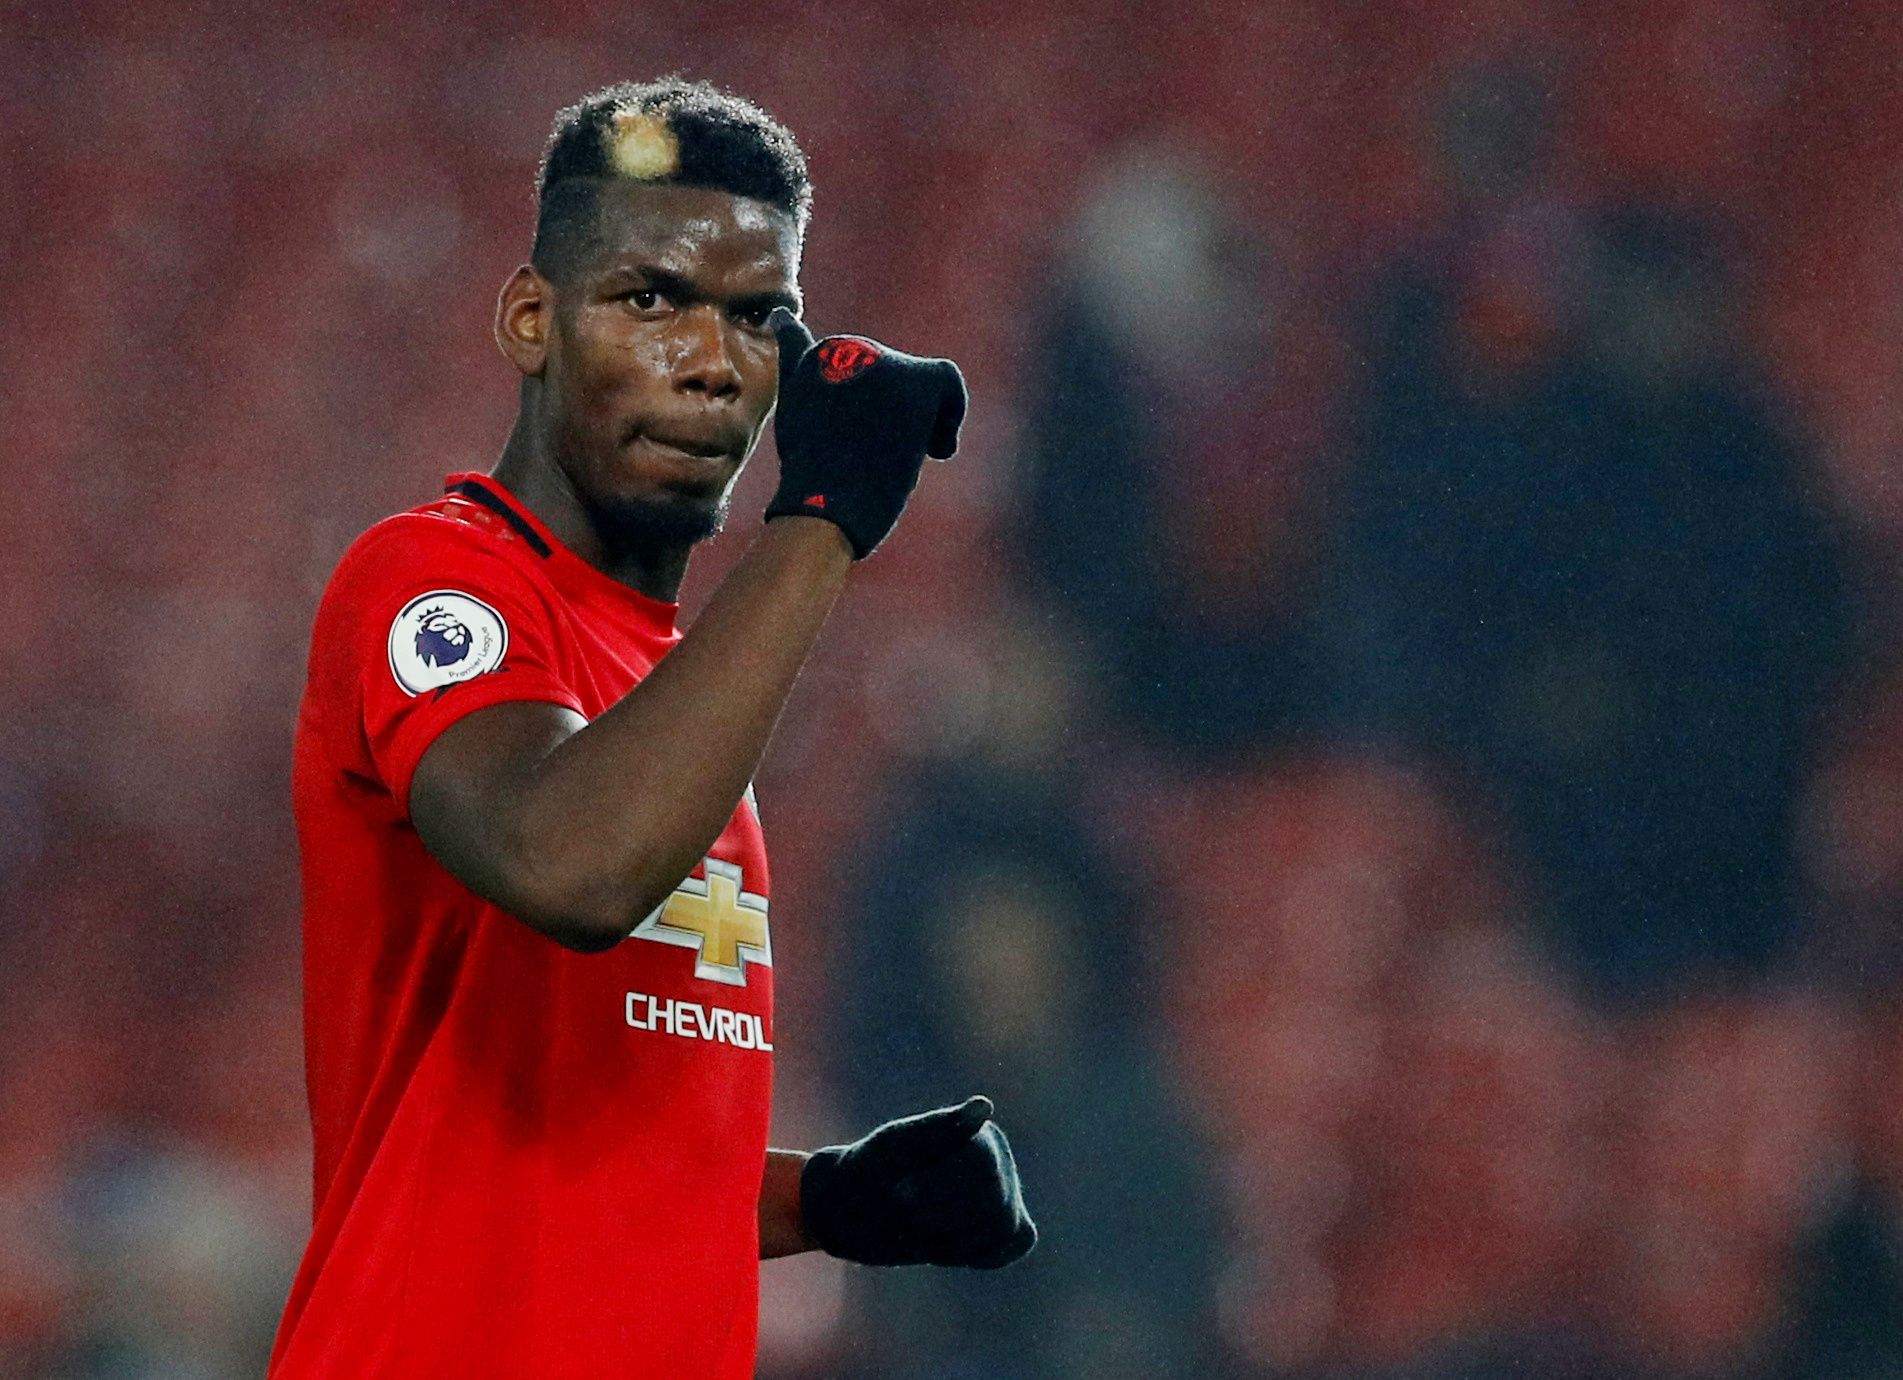 Manchester United midfielder Paul Pogba Manchester United Ole Gunnar Solskjaer Bruno Fernandes Scott McTominay Facundo Pellistri occer Football - Premier League - Manchester United v Newcastle United - Old Trafford, Manchester, Britain - December 26, 2019  Manchester United's Paul Pogba acknowledges fans after the match          REUTERS/Phil Noble  EDITORIAL USE ONLY. No use with unauthorized audio, video, data, fixture lists, club/league logos or 